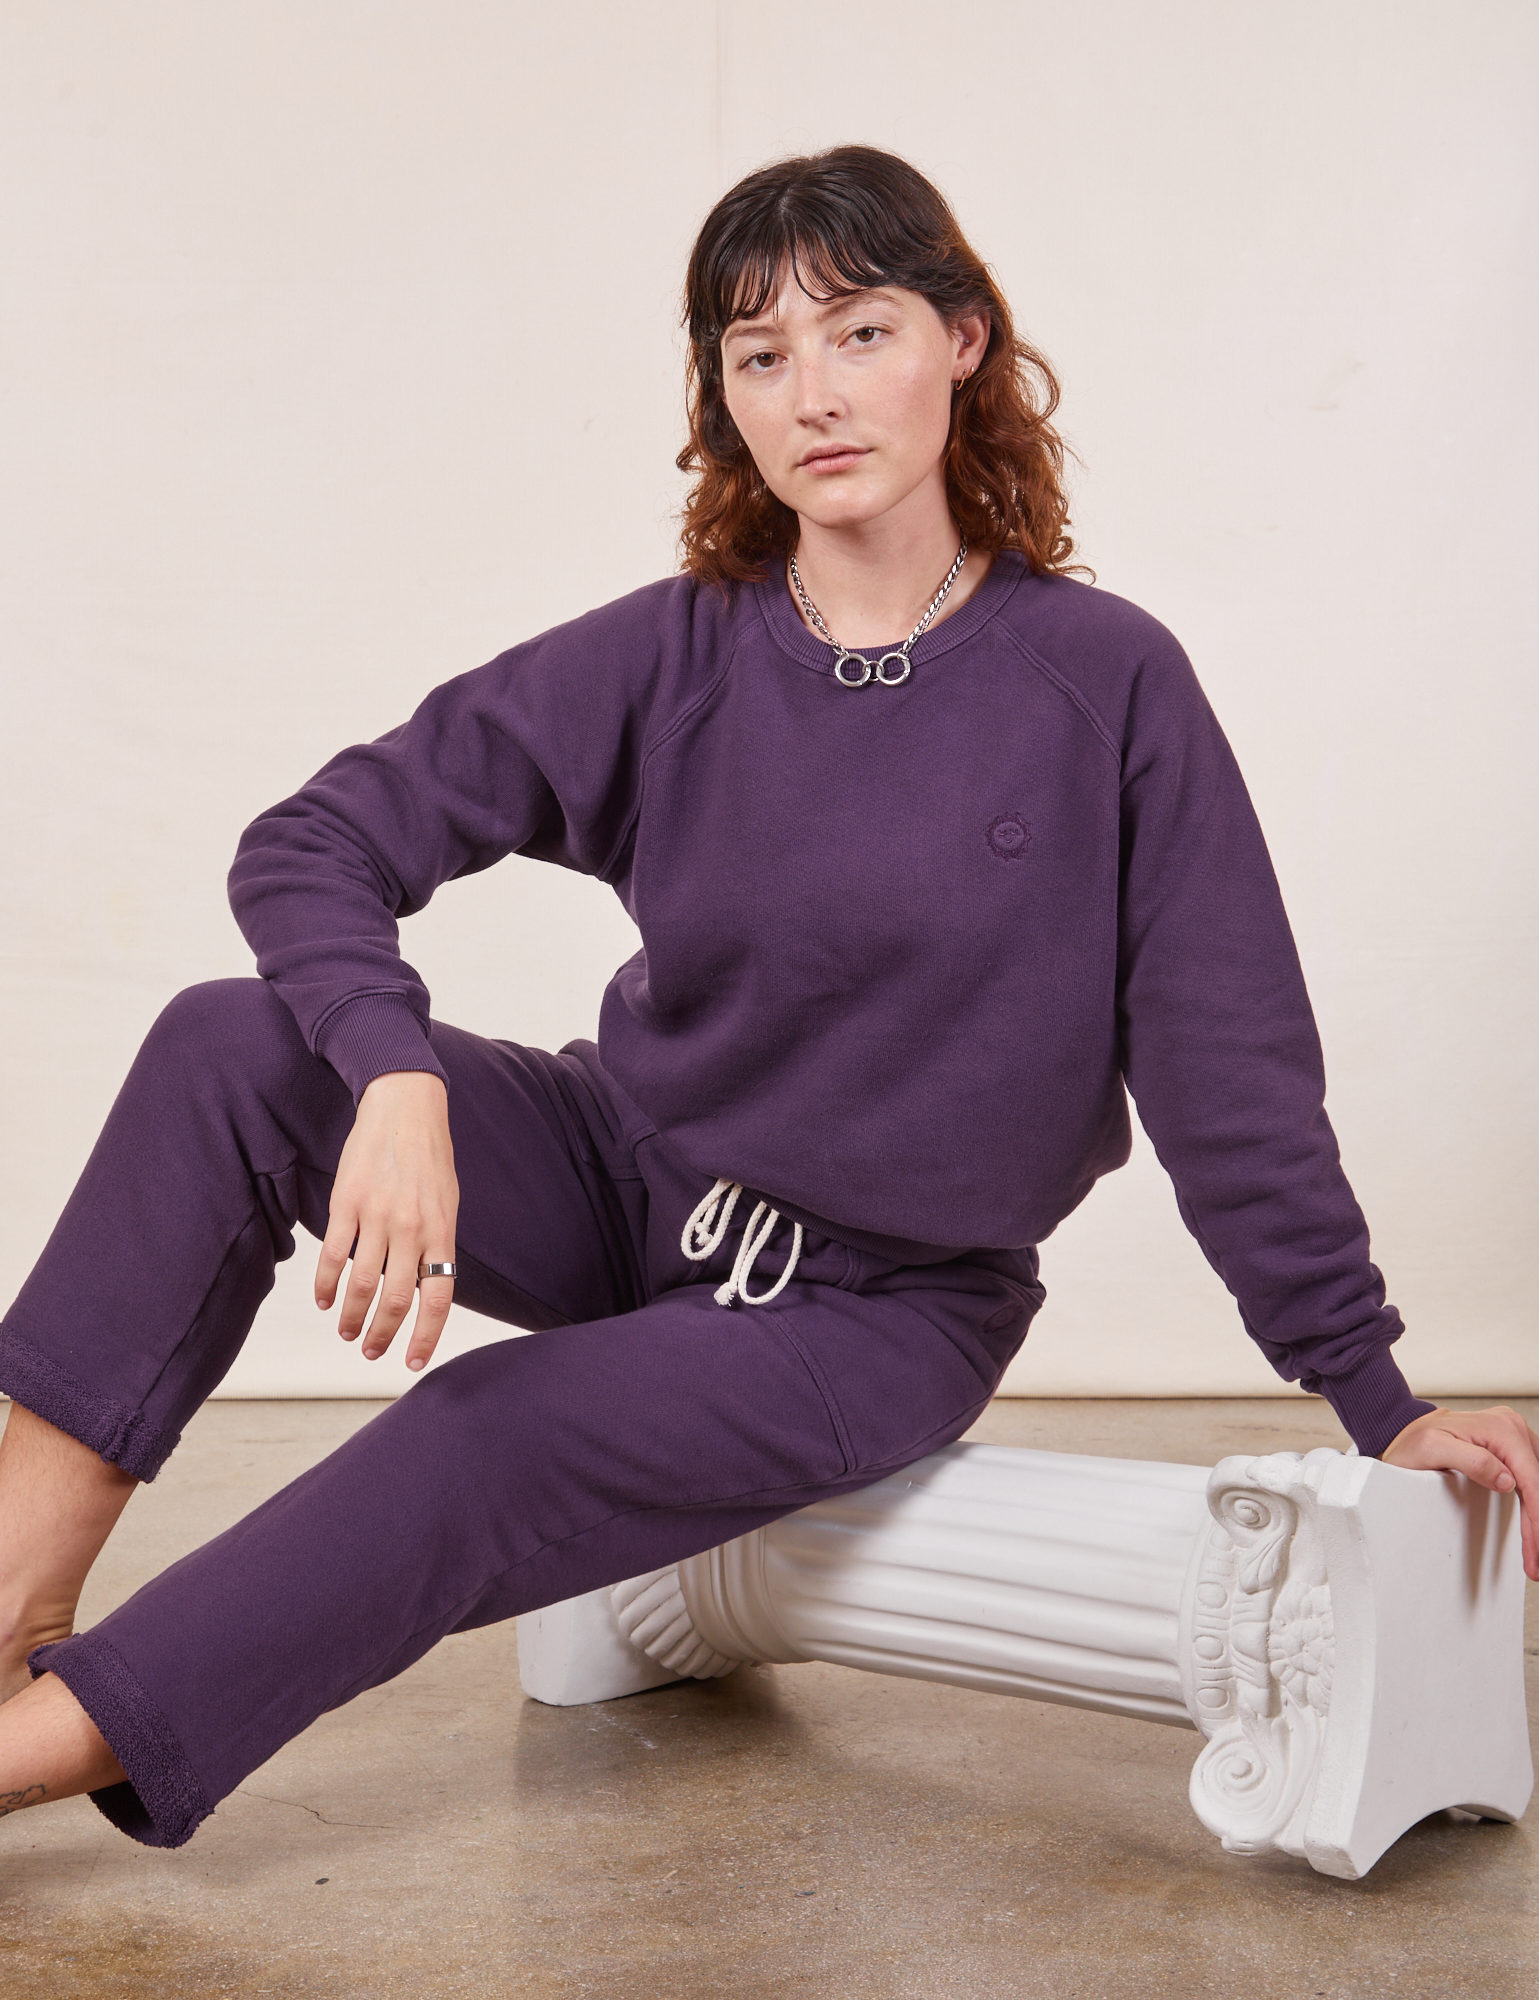 Alex is wearing Heavyweight Crew in Nebula Purple and matching Cropped Rolled Cuff Sweatpants